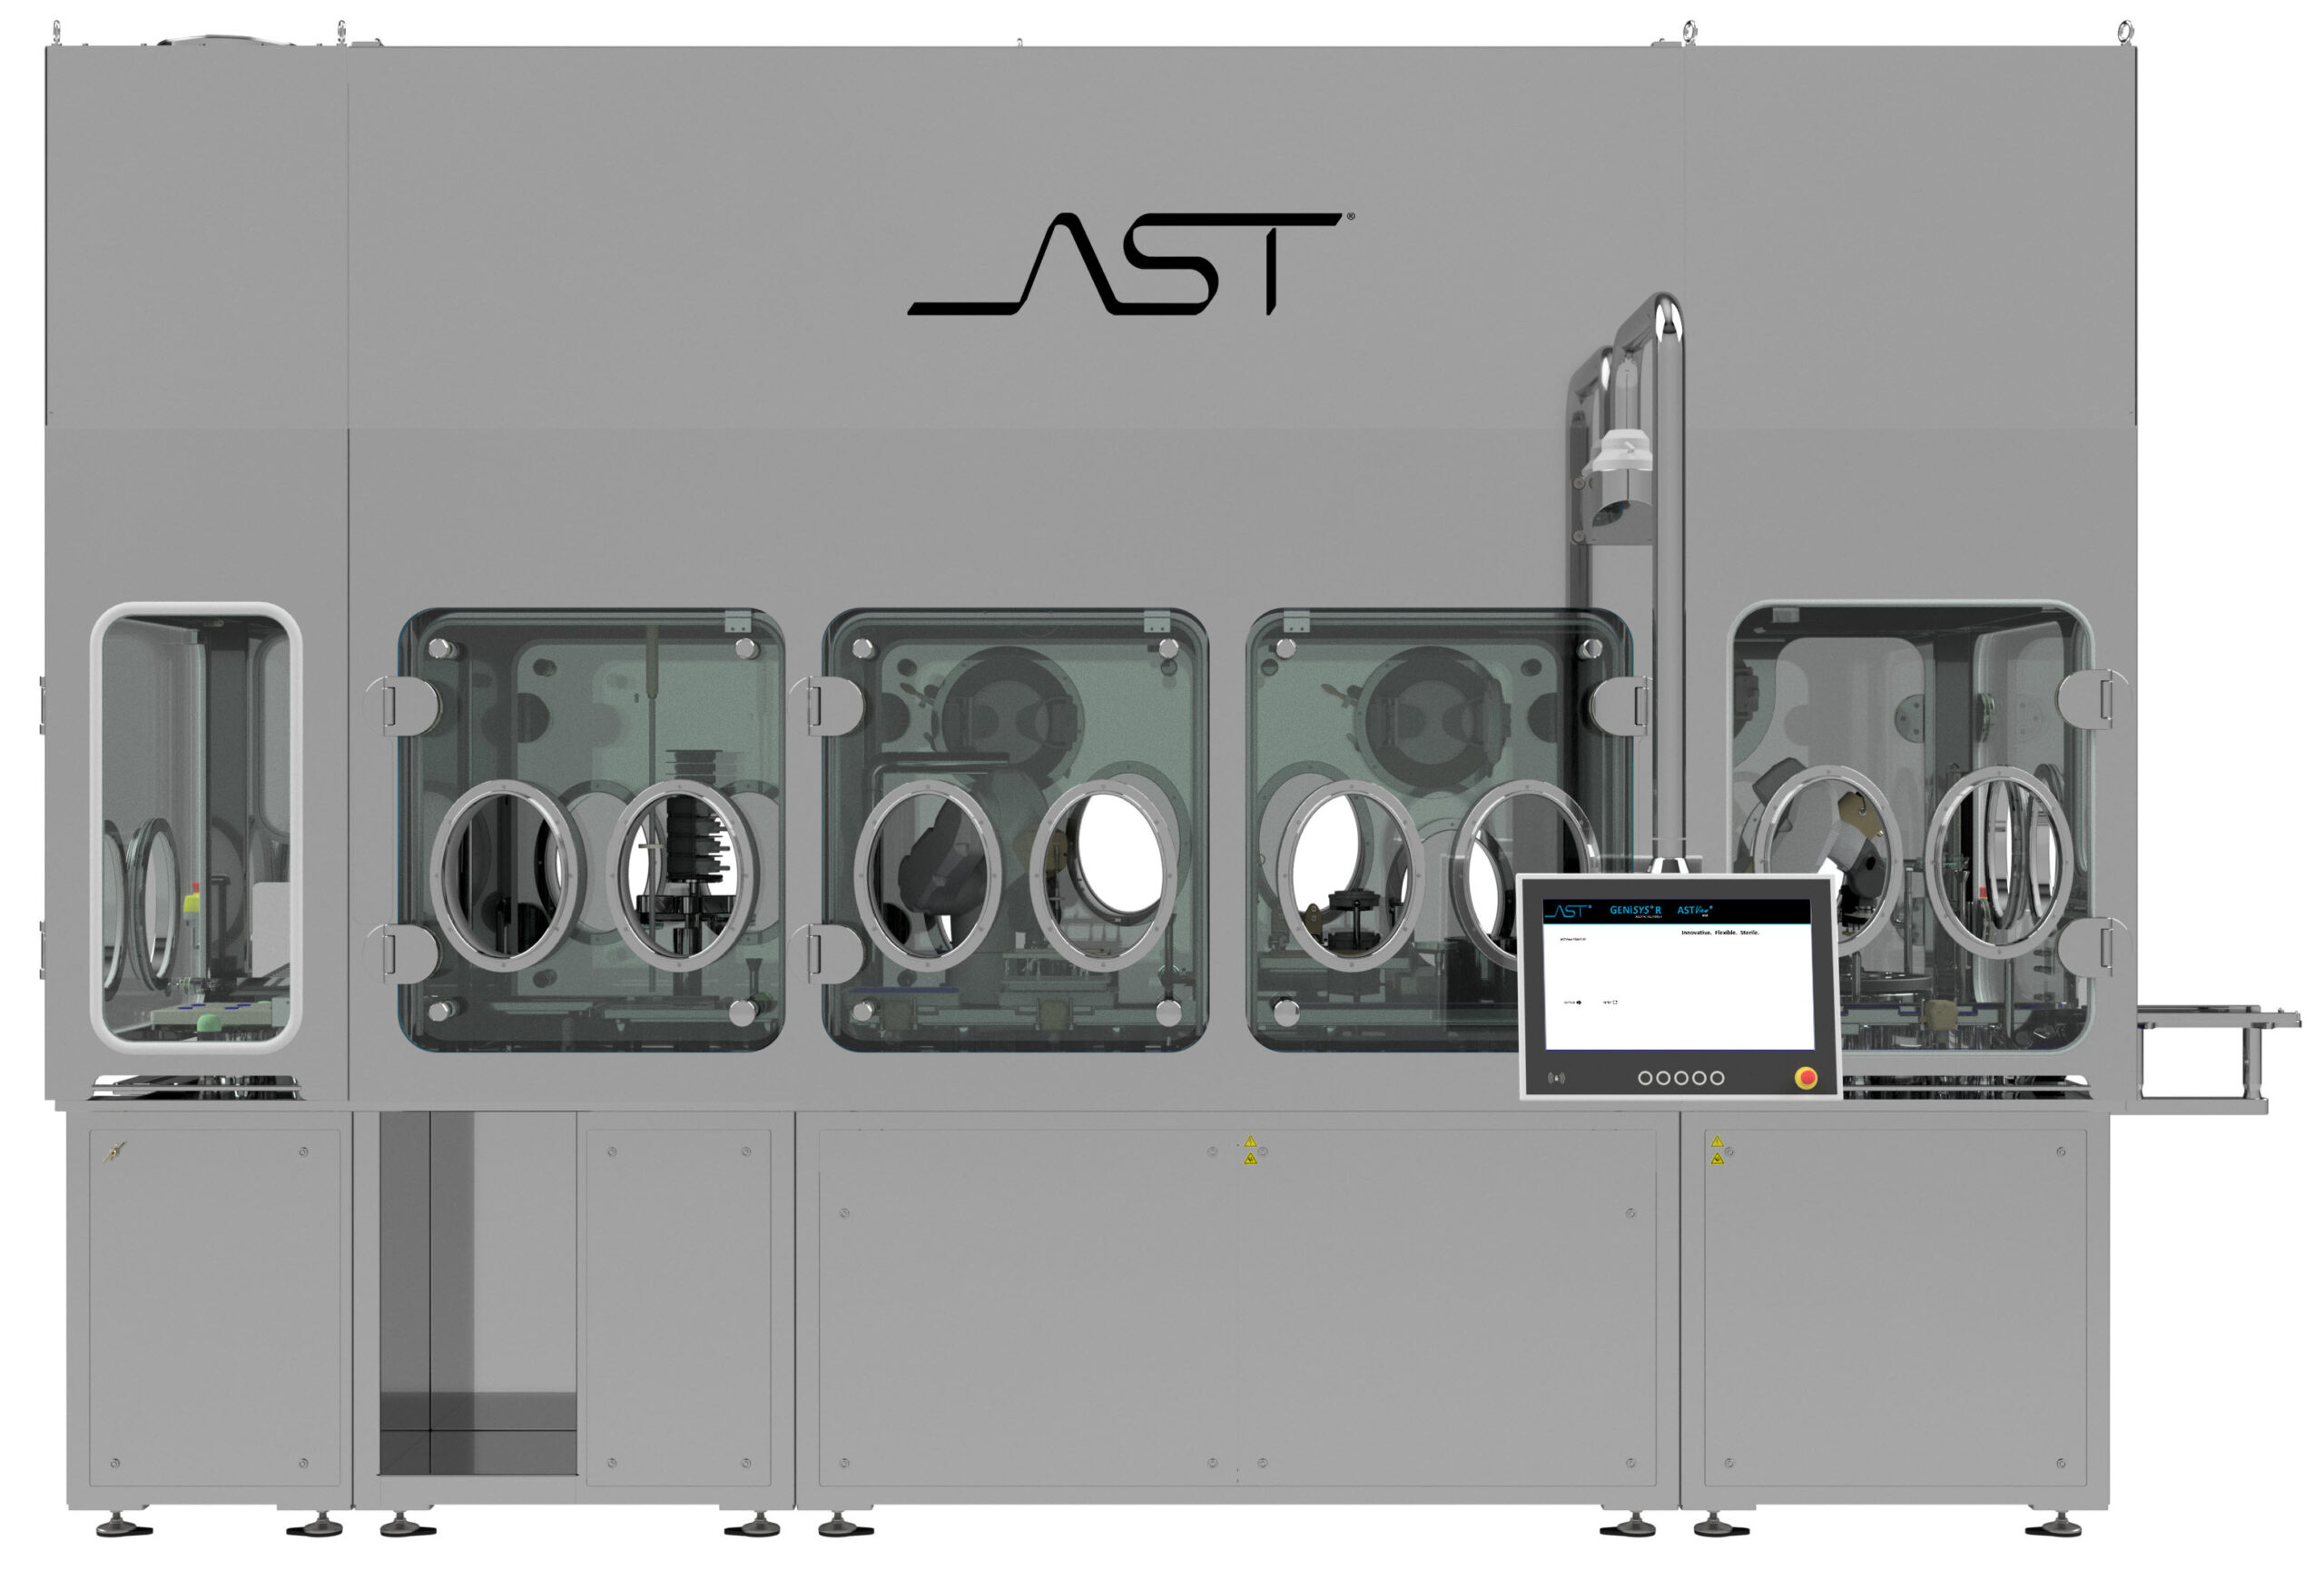 An image showing the AST aseptic processing isolator unit for fill-finish professionals in drug development and bio pharma industries 